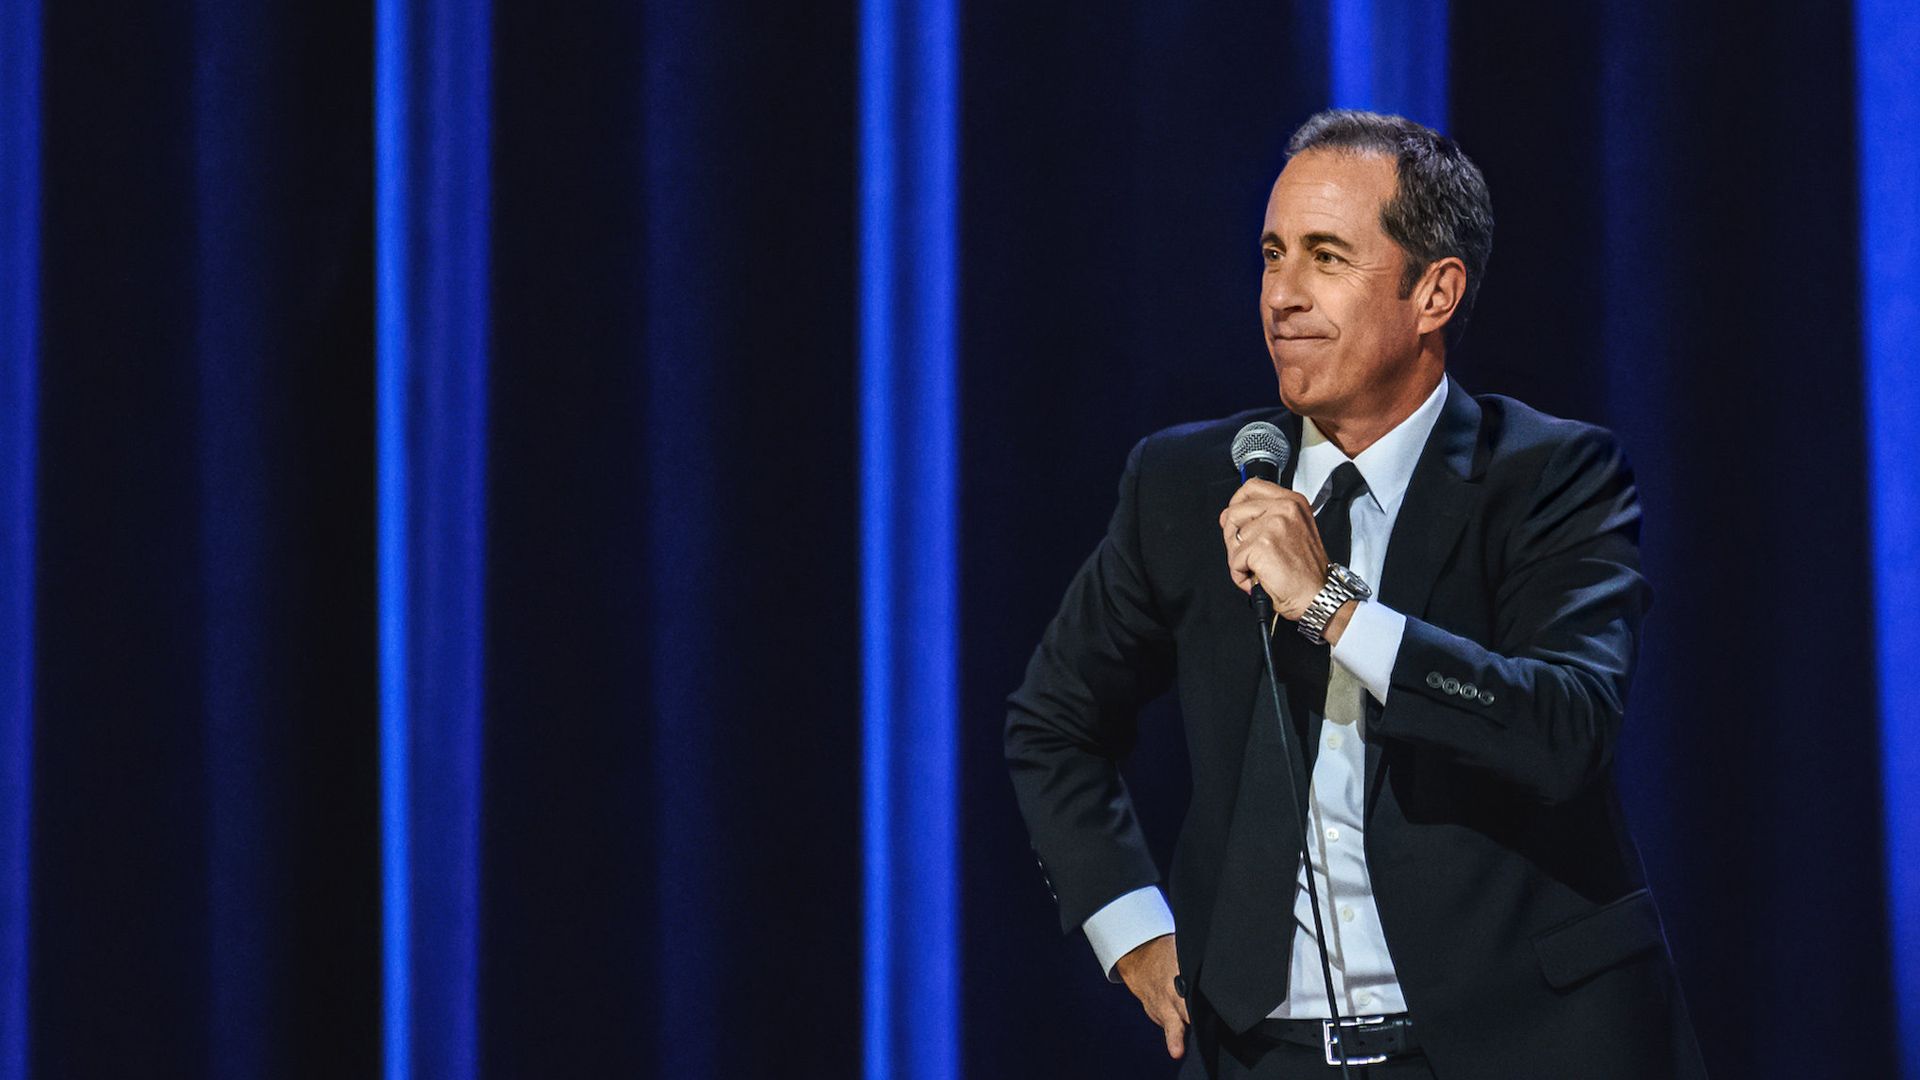 Jerry Seinfeld: 23 Hours to Kill background